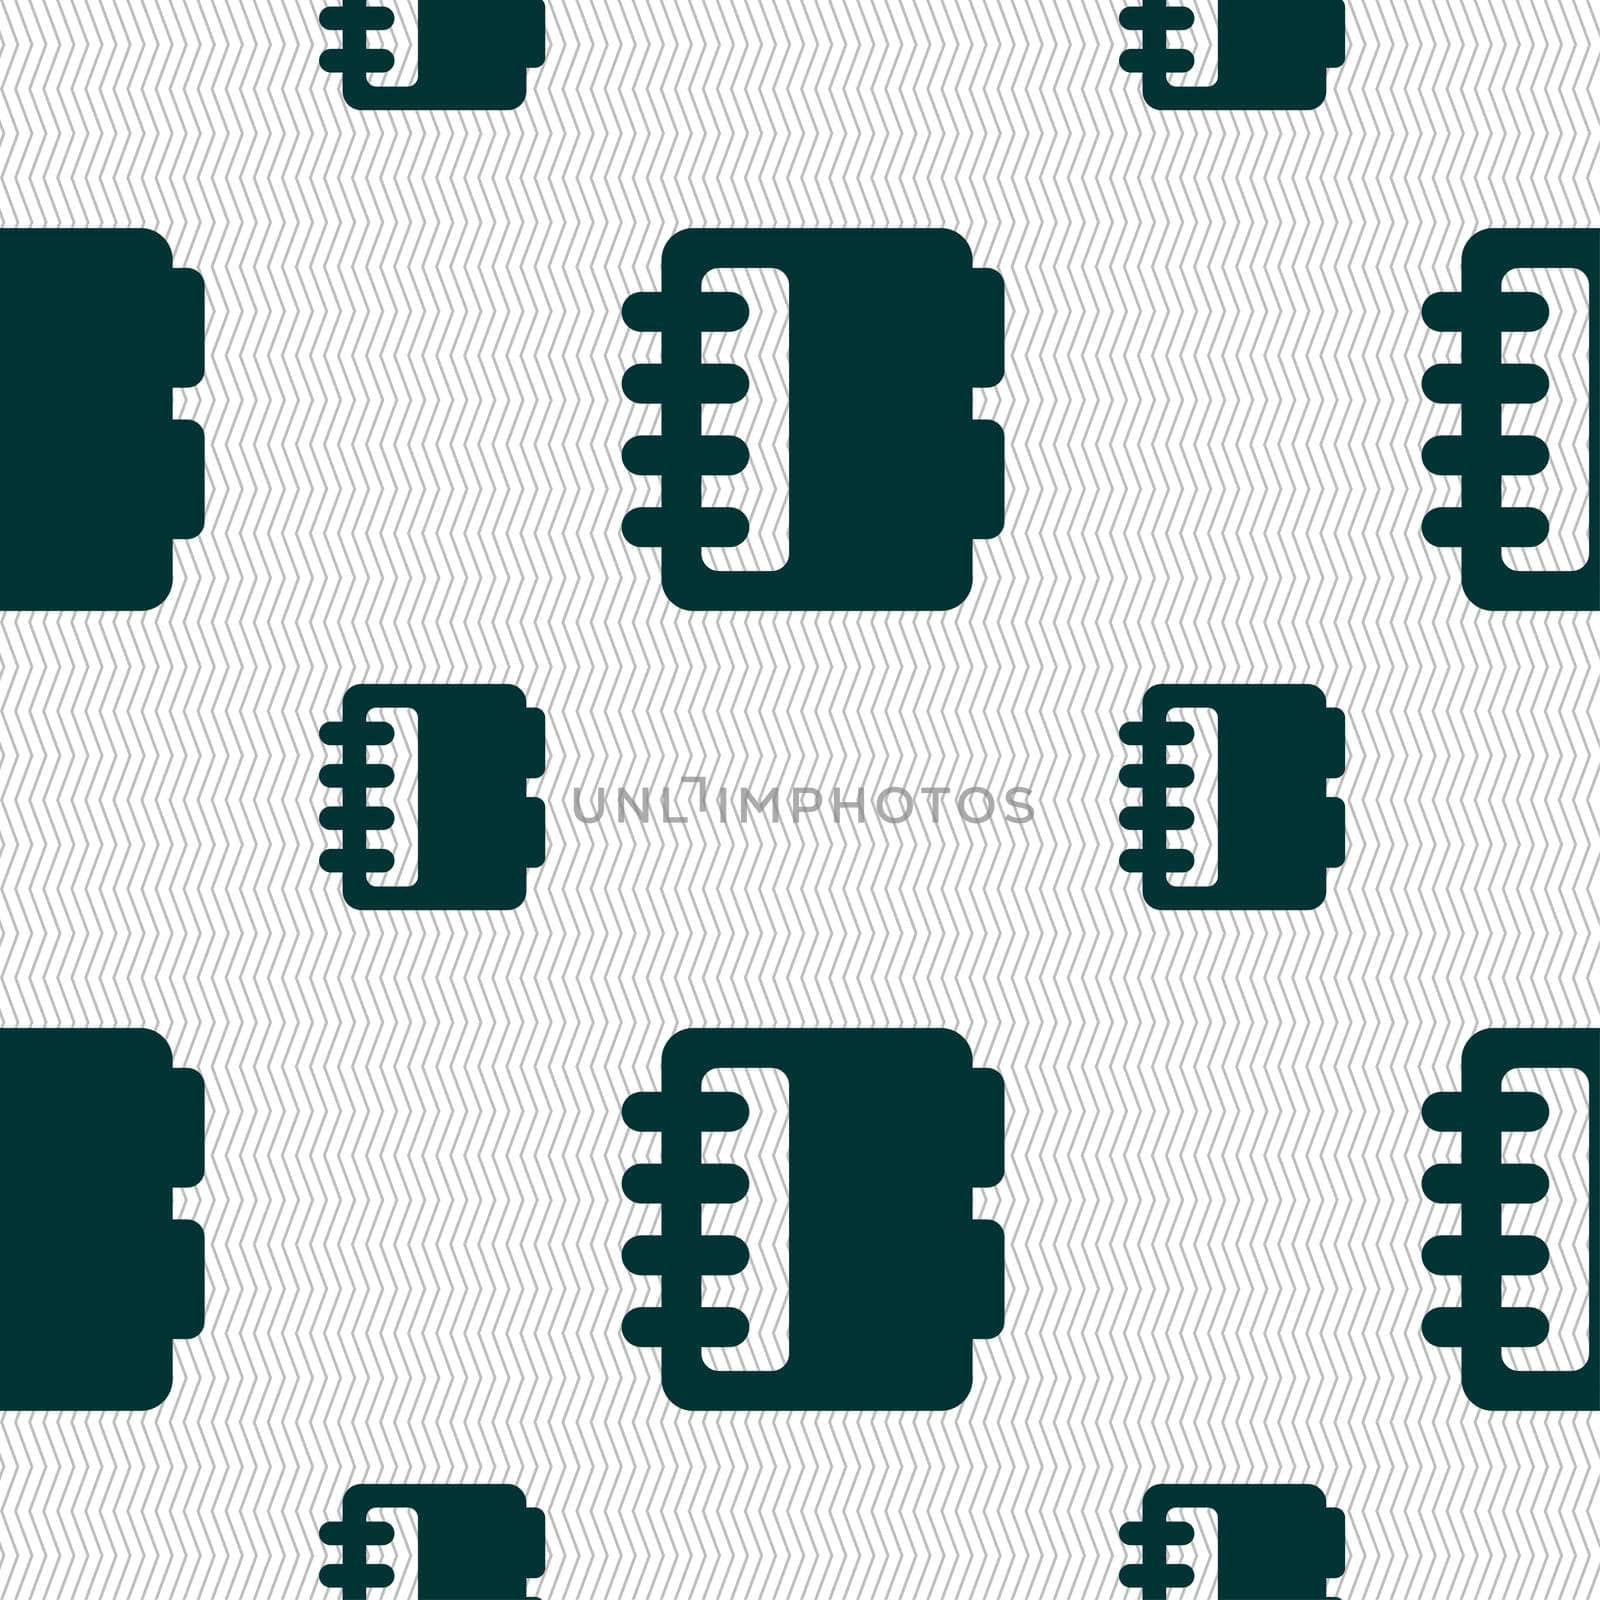 Notepad, calendar icon sign. Seamless pattern with geometric texture. illustration